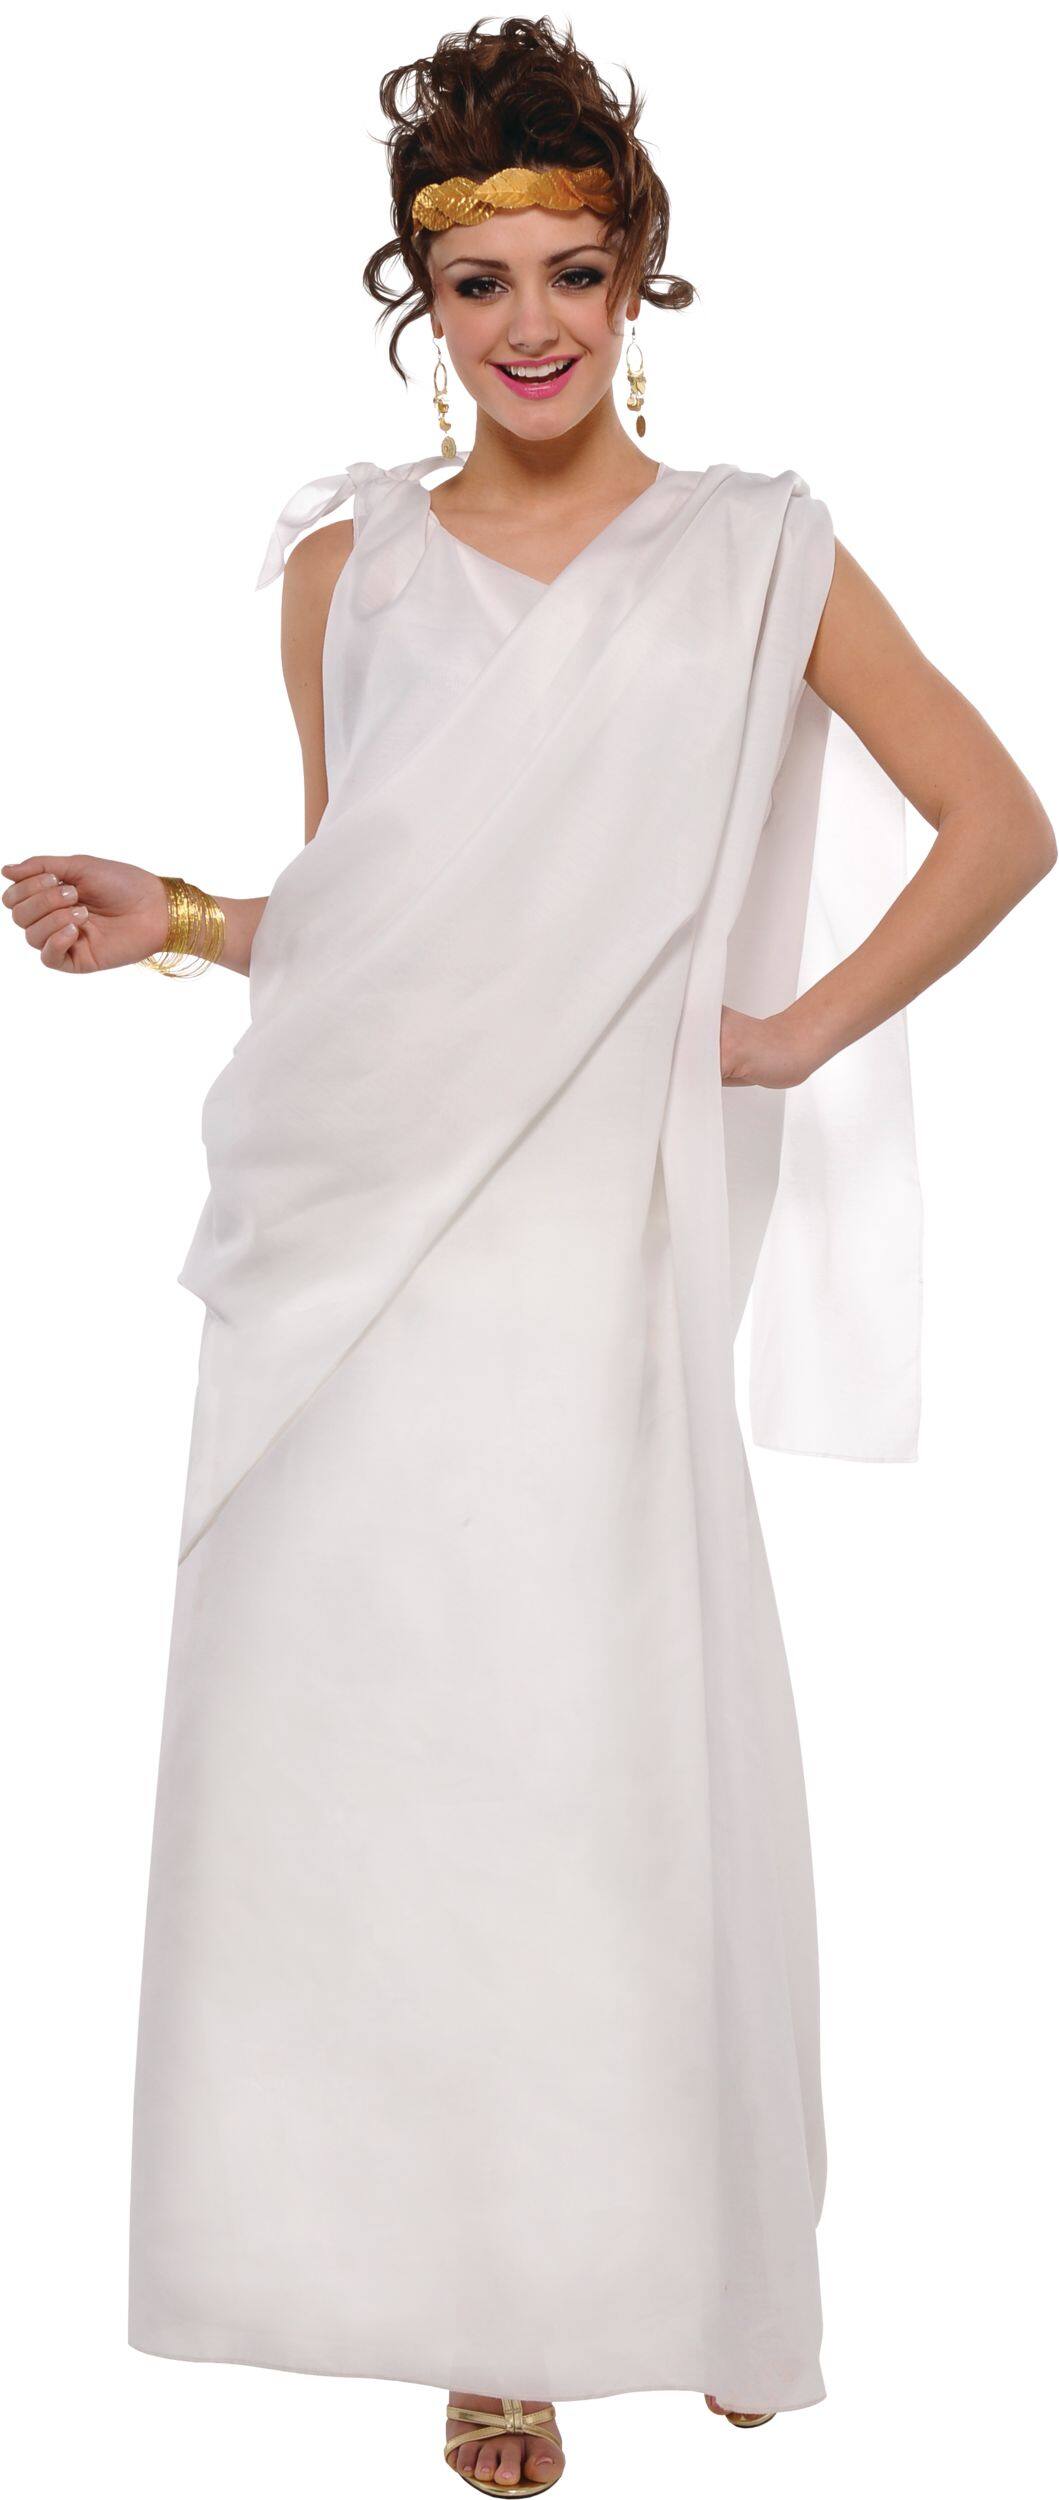 Adult Greek Drapped Toga, White, One Size, Wearable Costume Accessory ...